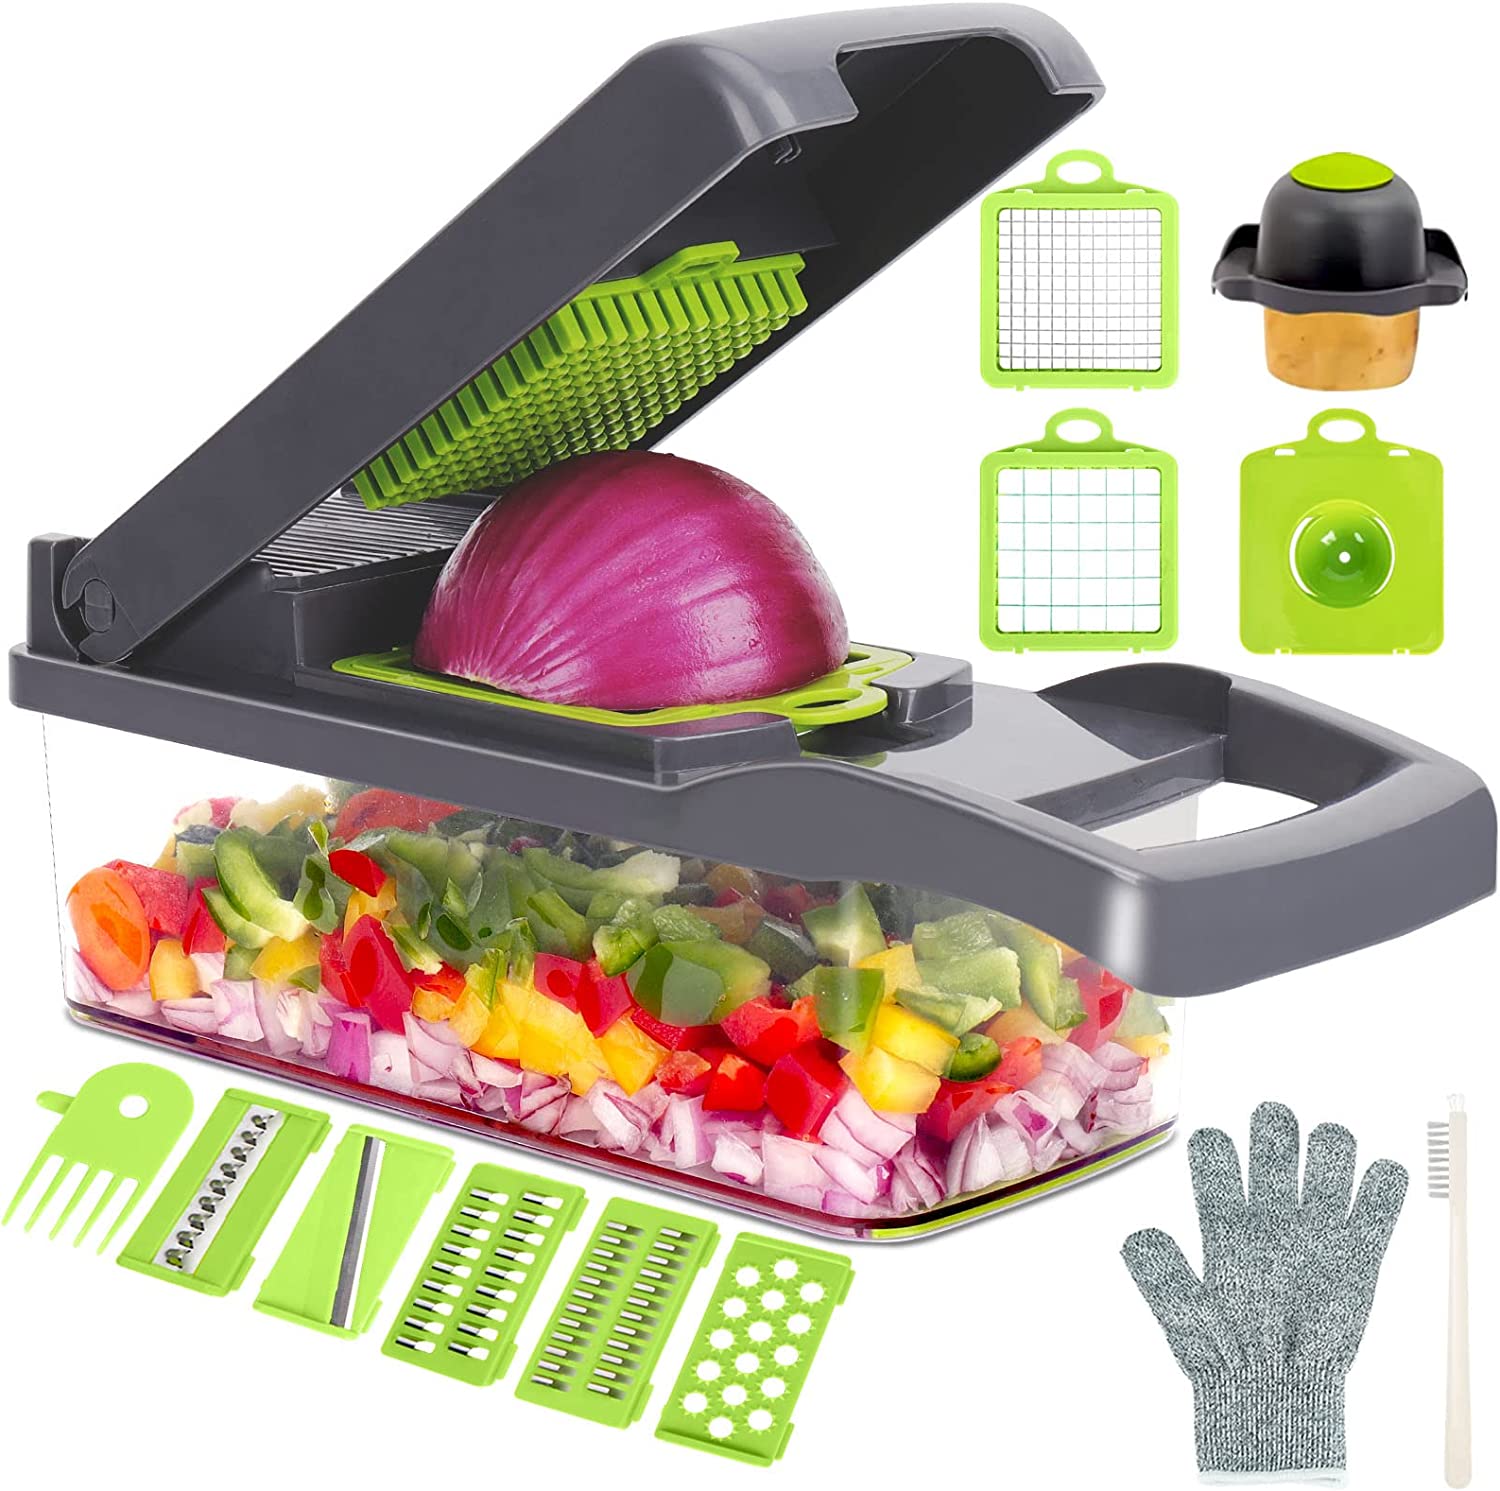 All-In-One Vegetable Chopper $...